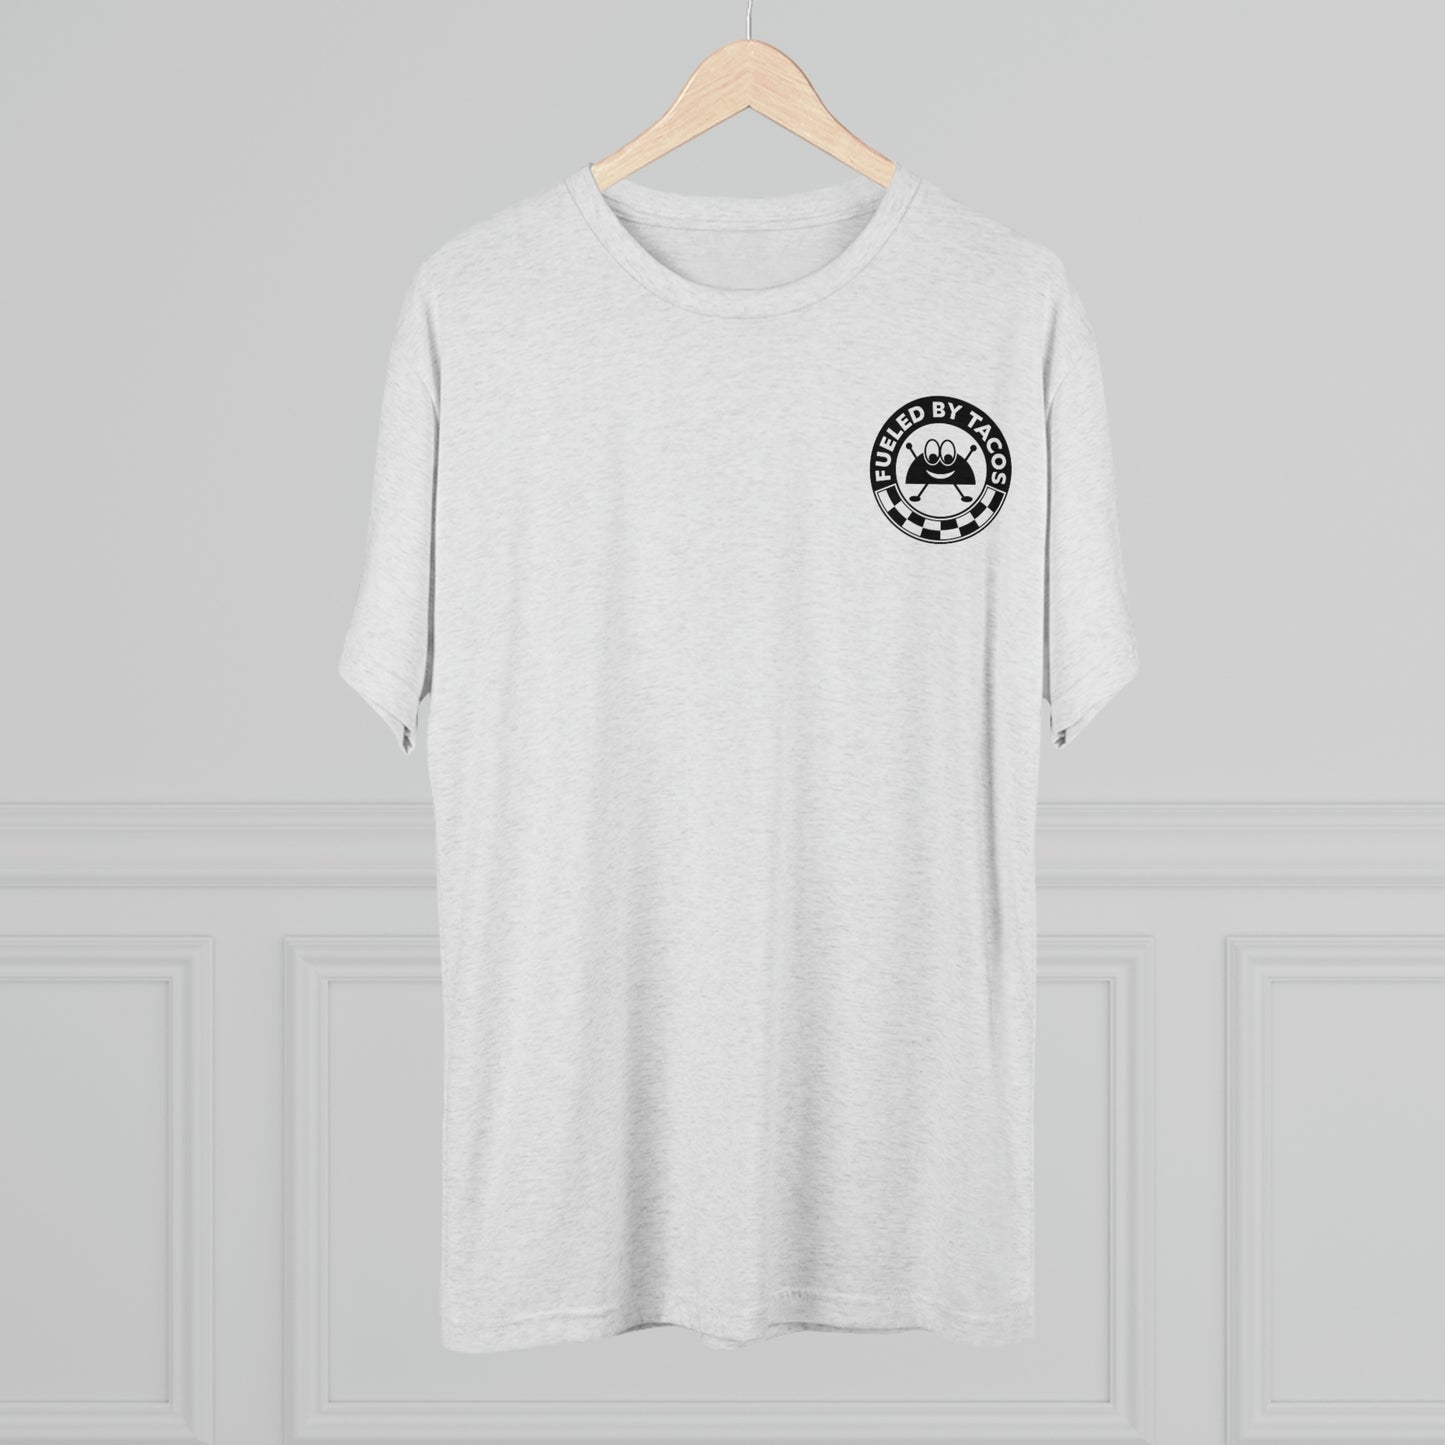 Tri-Blend Crew Tee Logo front and back